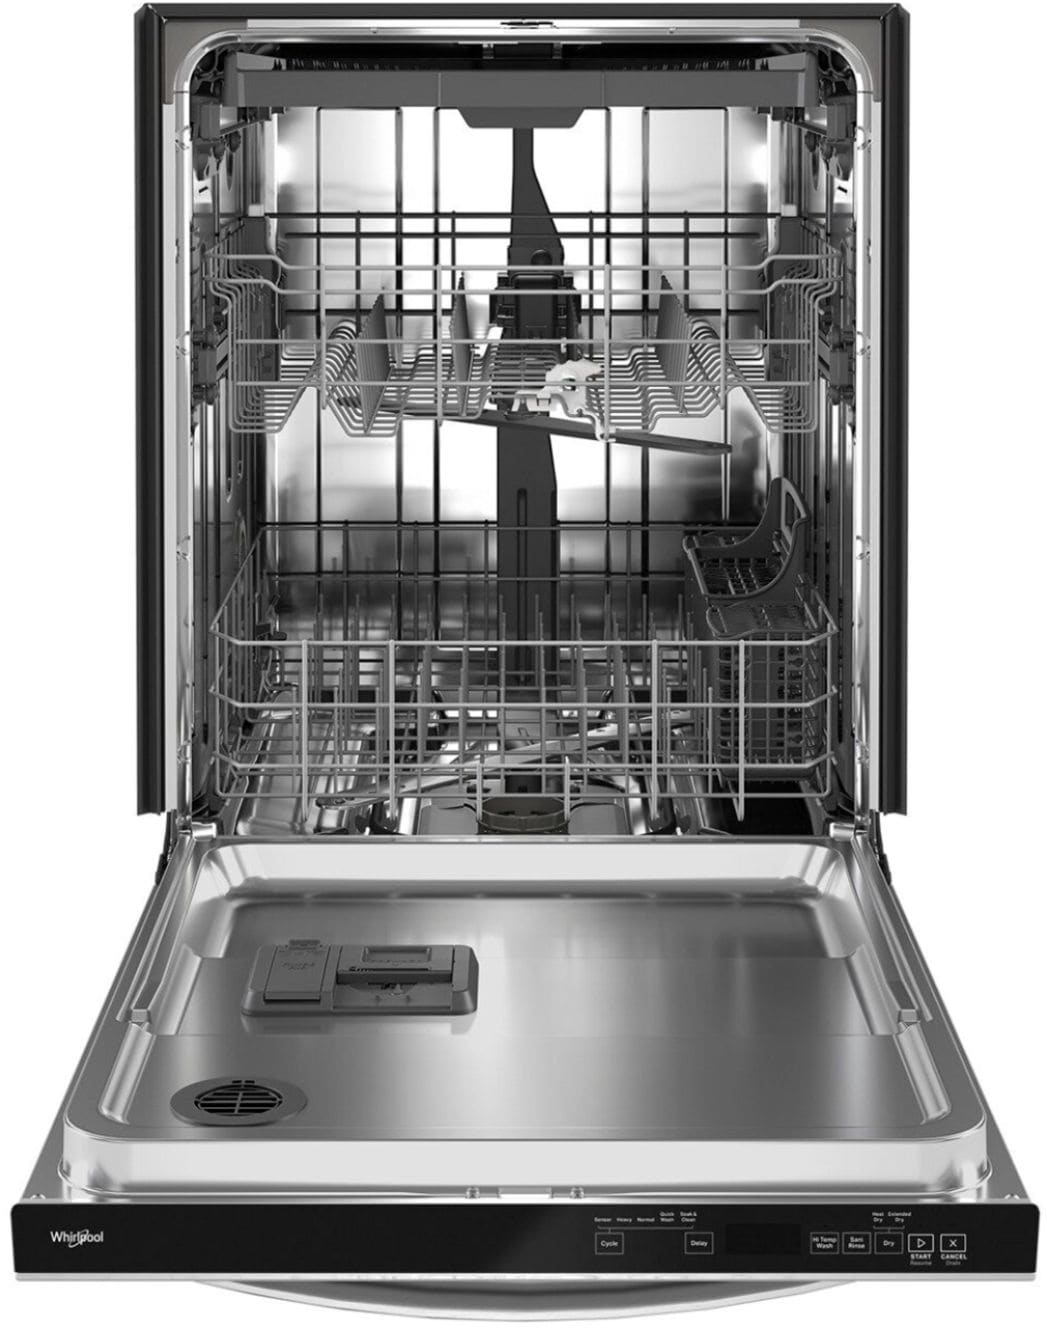 Whirlpool - 24" Top Control Built-In Dishwasher with Stainless Steel Tub, Large Capacity, 3rd Rack, 47 dBA - Stainless steel_15